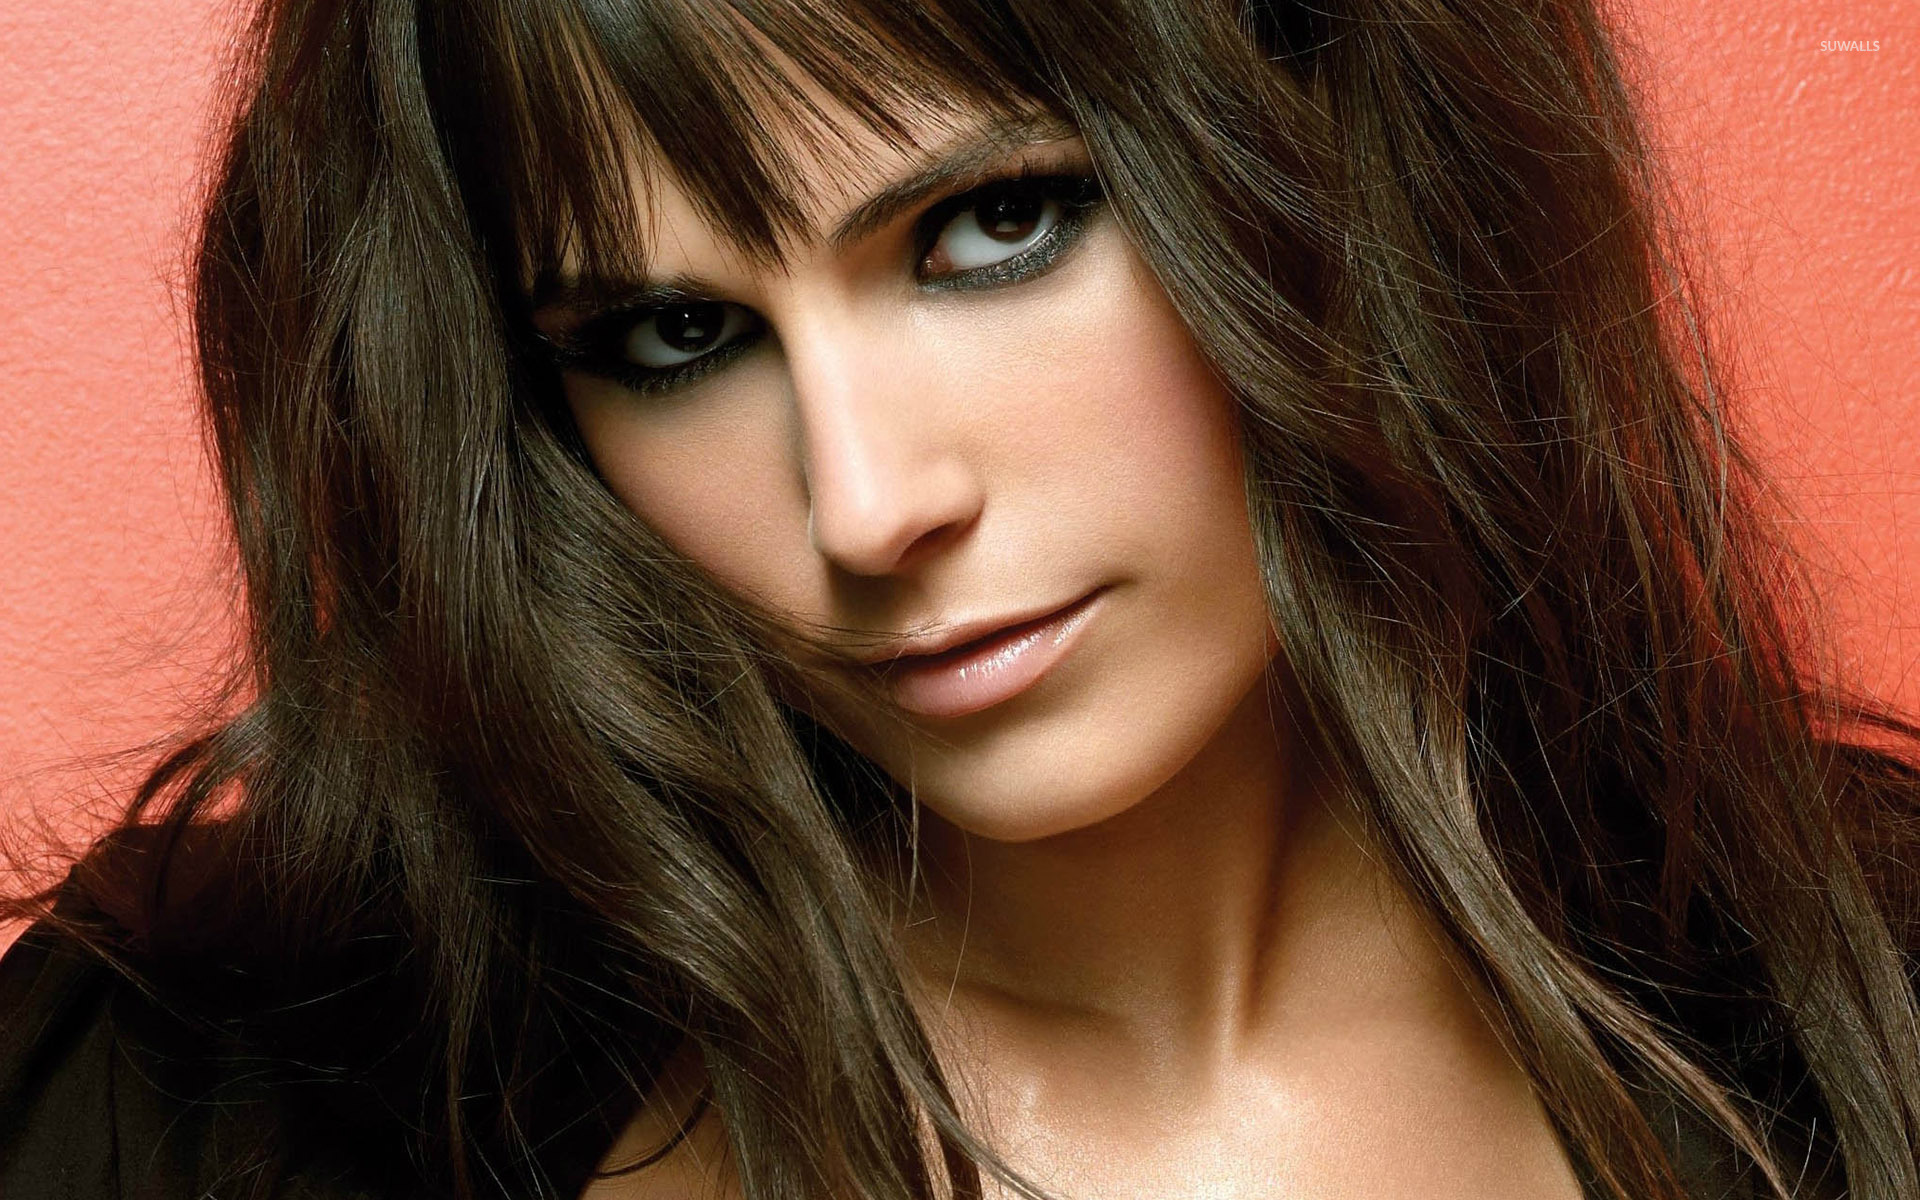 Jordana Brewster Fast And Furious 9 Wallpapers